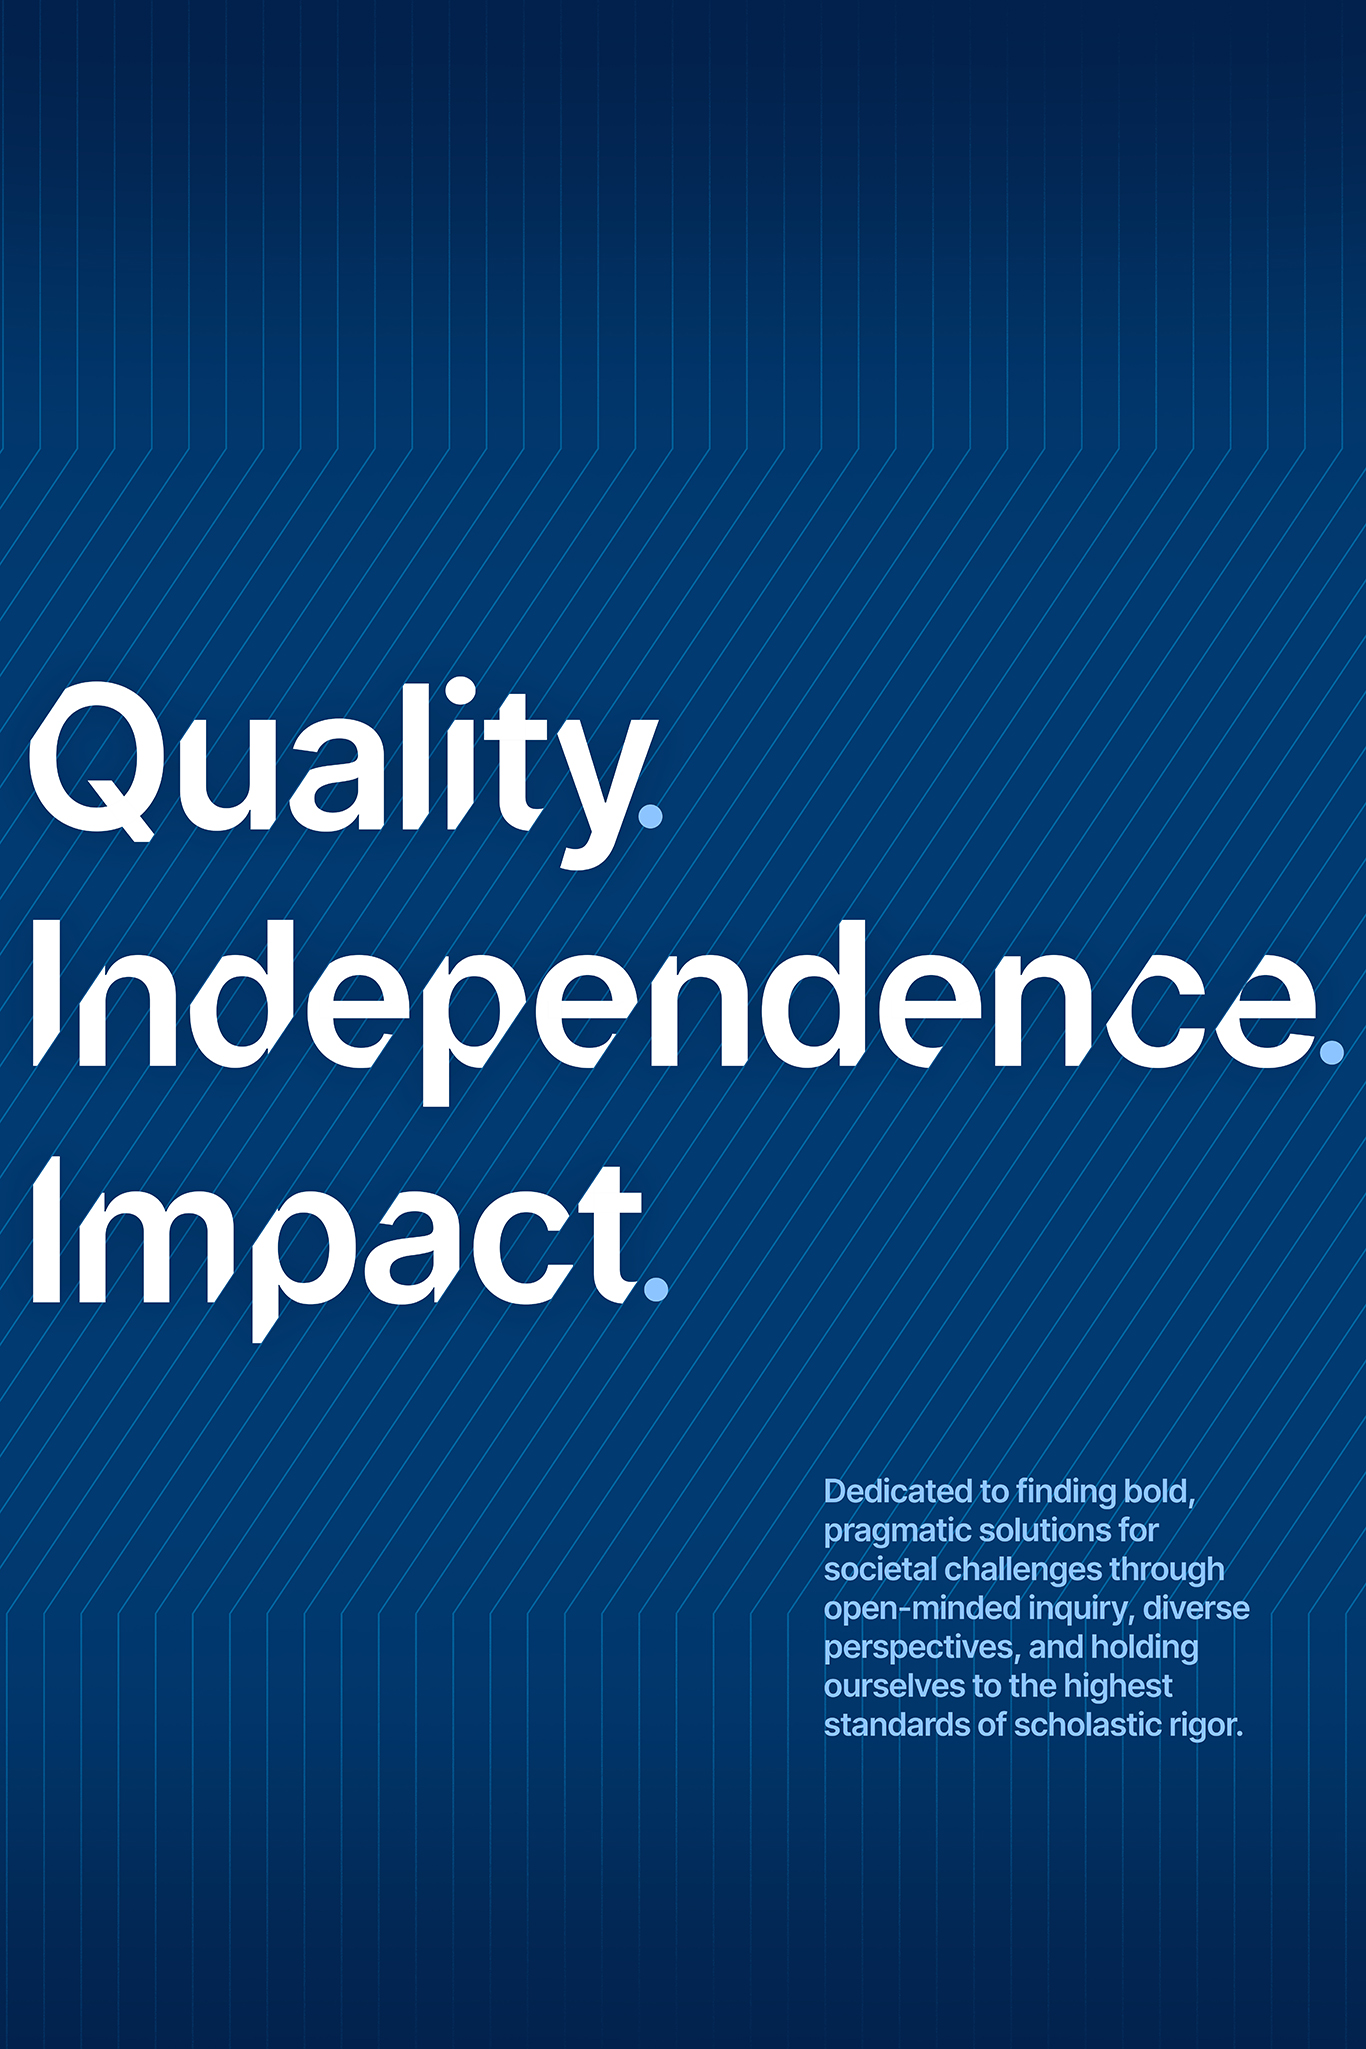 A dark blue poster with light blue lines with large white text that reads “Quality. Independence. Impact” and small light blue text that reads “Dedicated to finding bold, pragmatic solutions for societal challenges through open-minded inquiry, diverse perspectives, and holding ourselves to the highest standards of scholastic rigor.”.